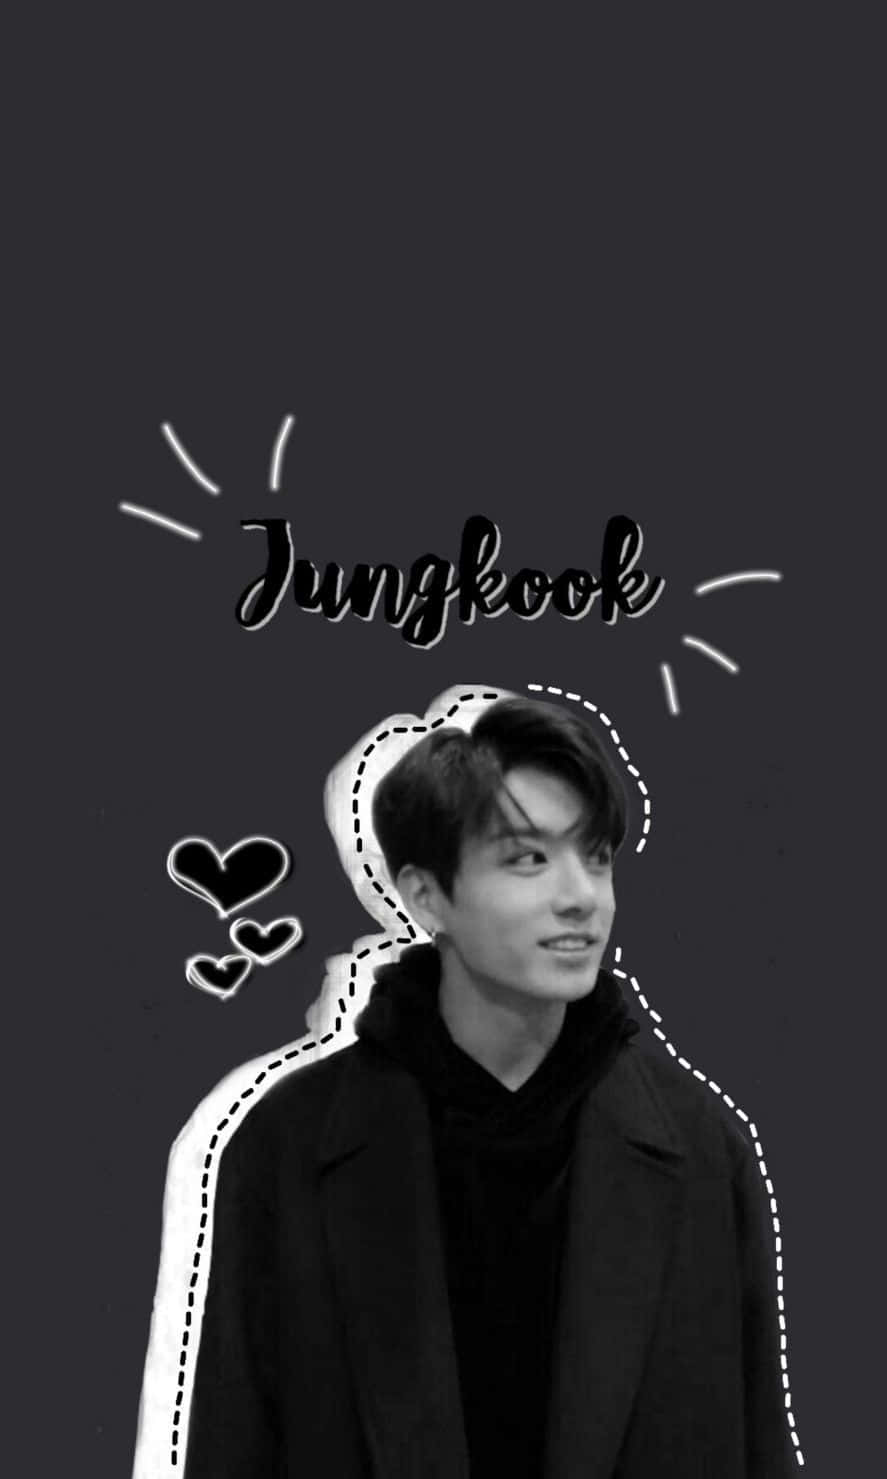 Aesthetic White And Black Iphone Jungkook Bts Wallpaper